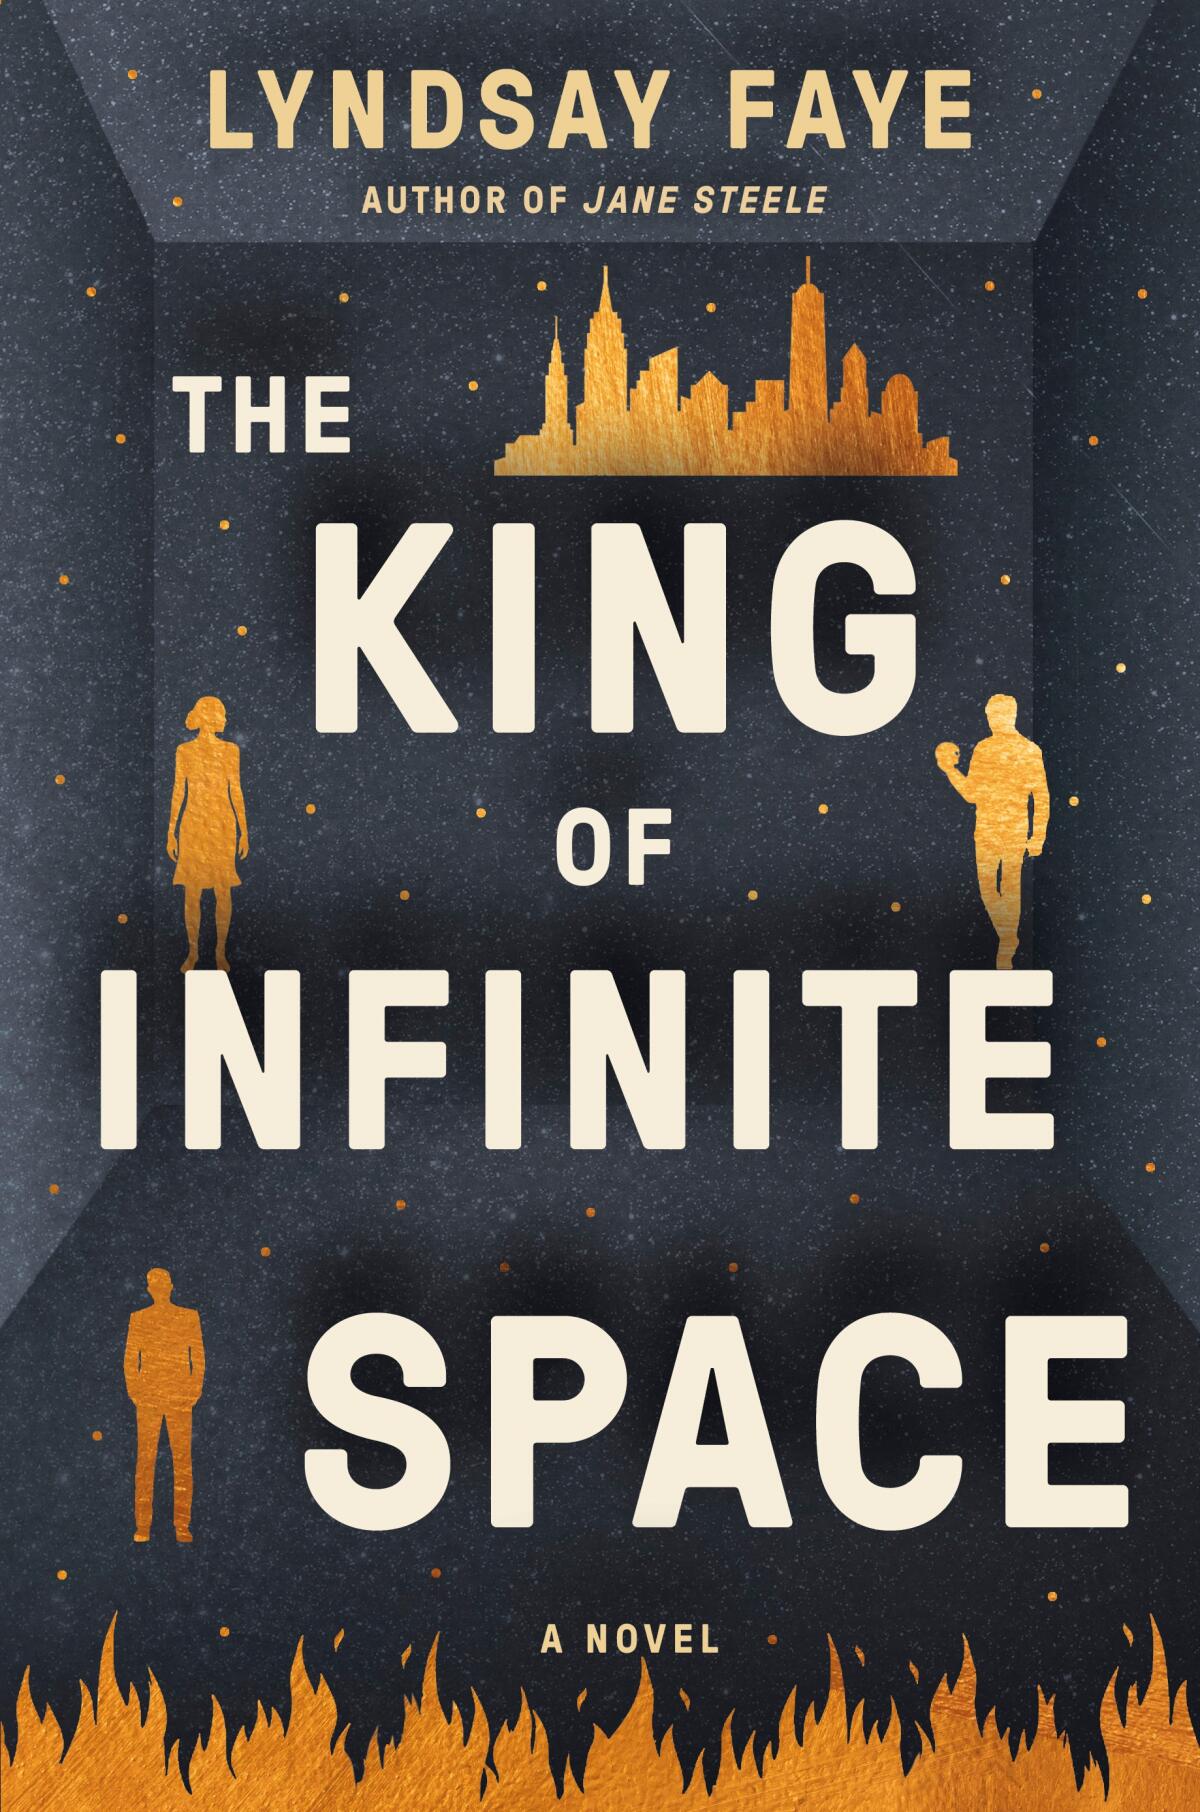 "The King of Infinite Space," by Lyndsay Faye